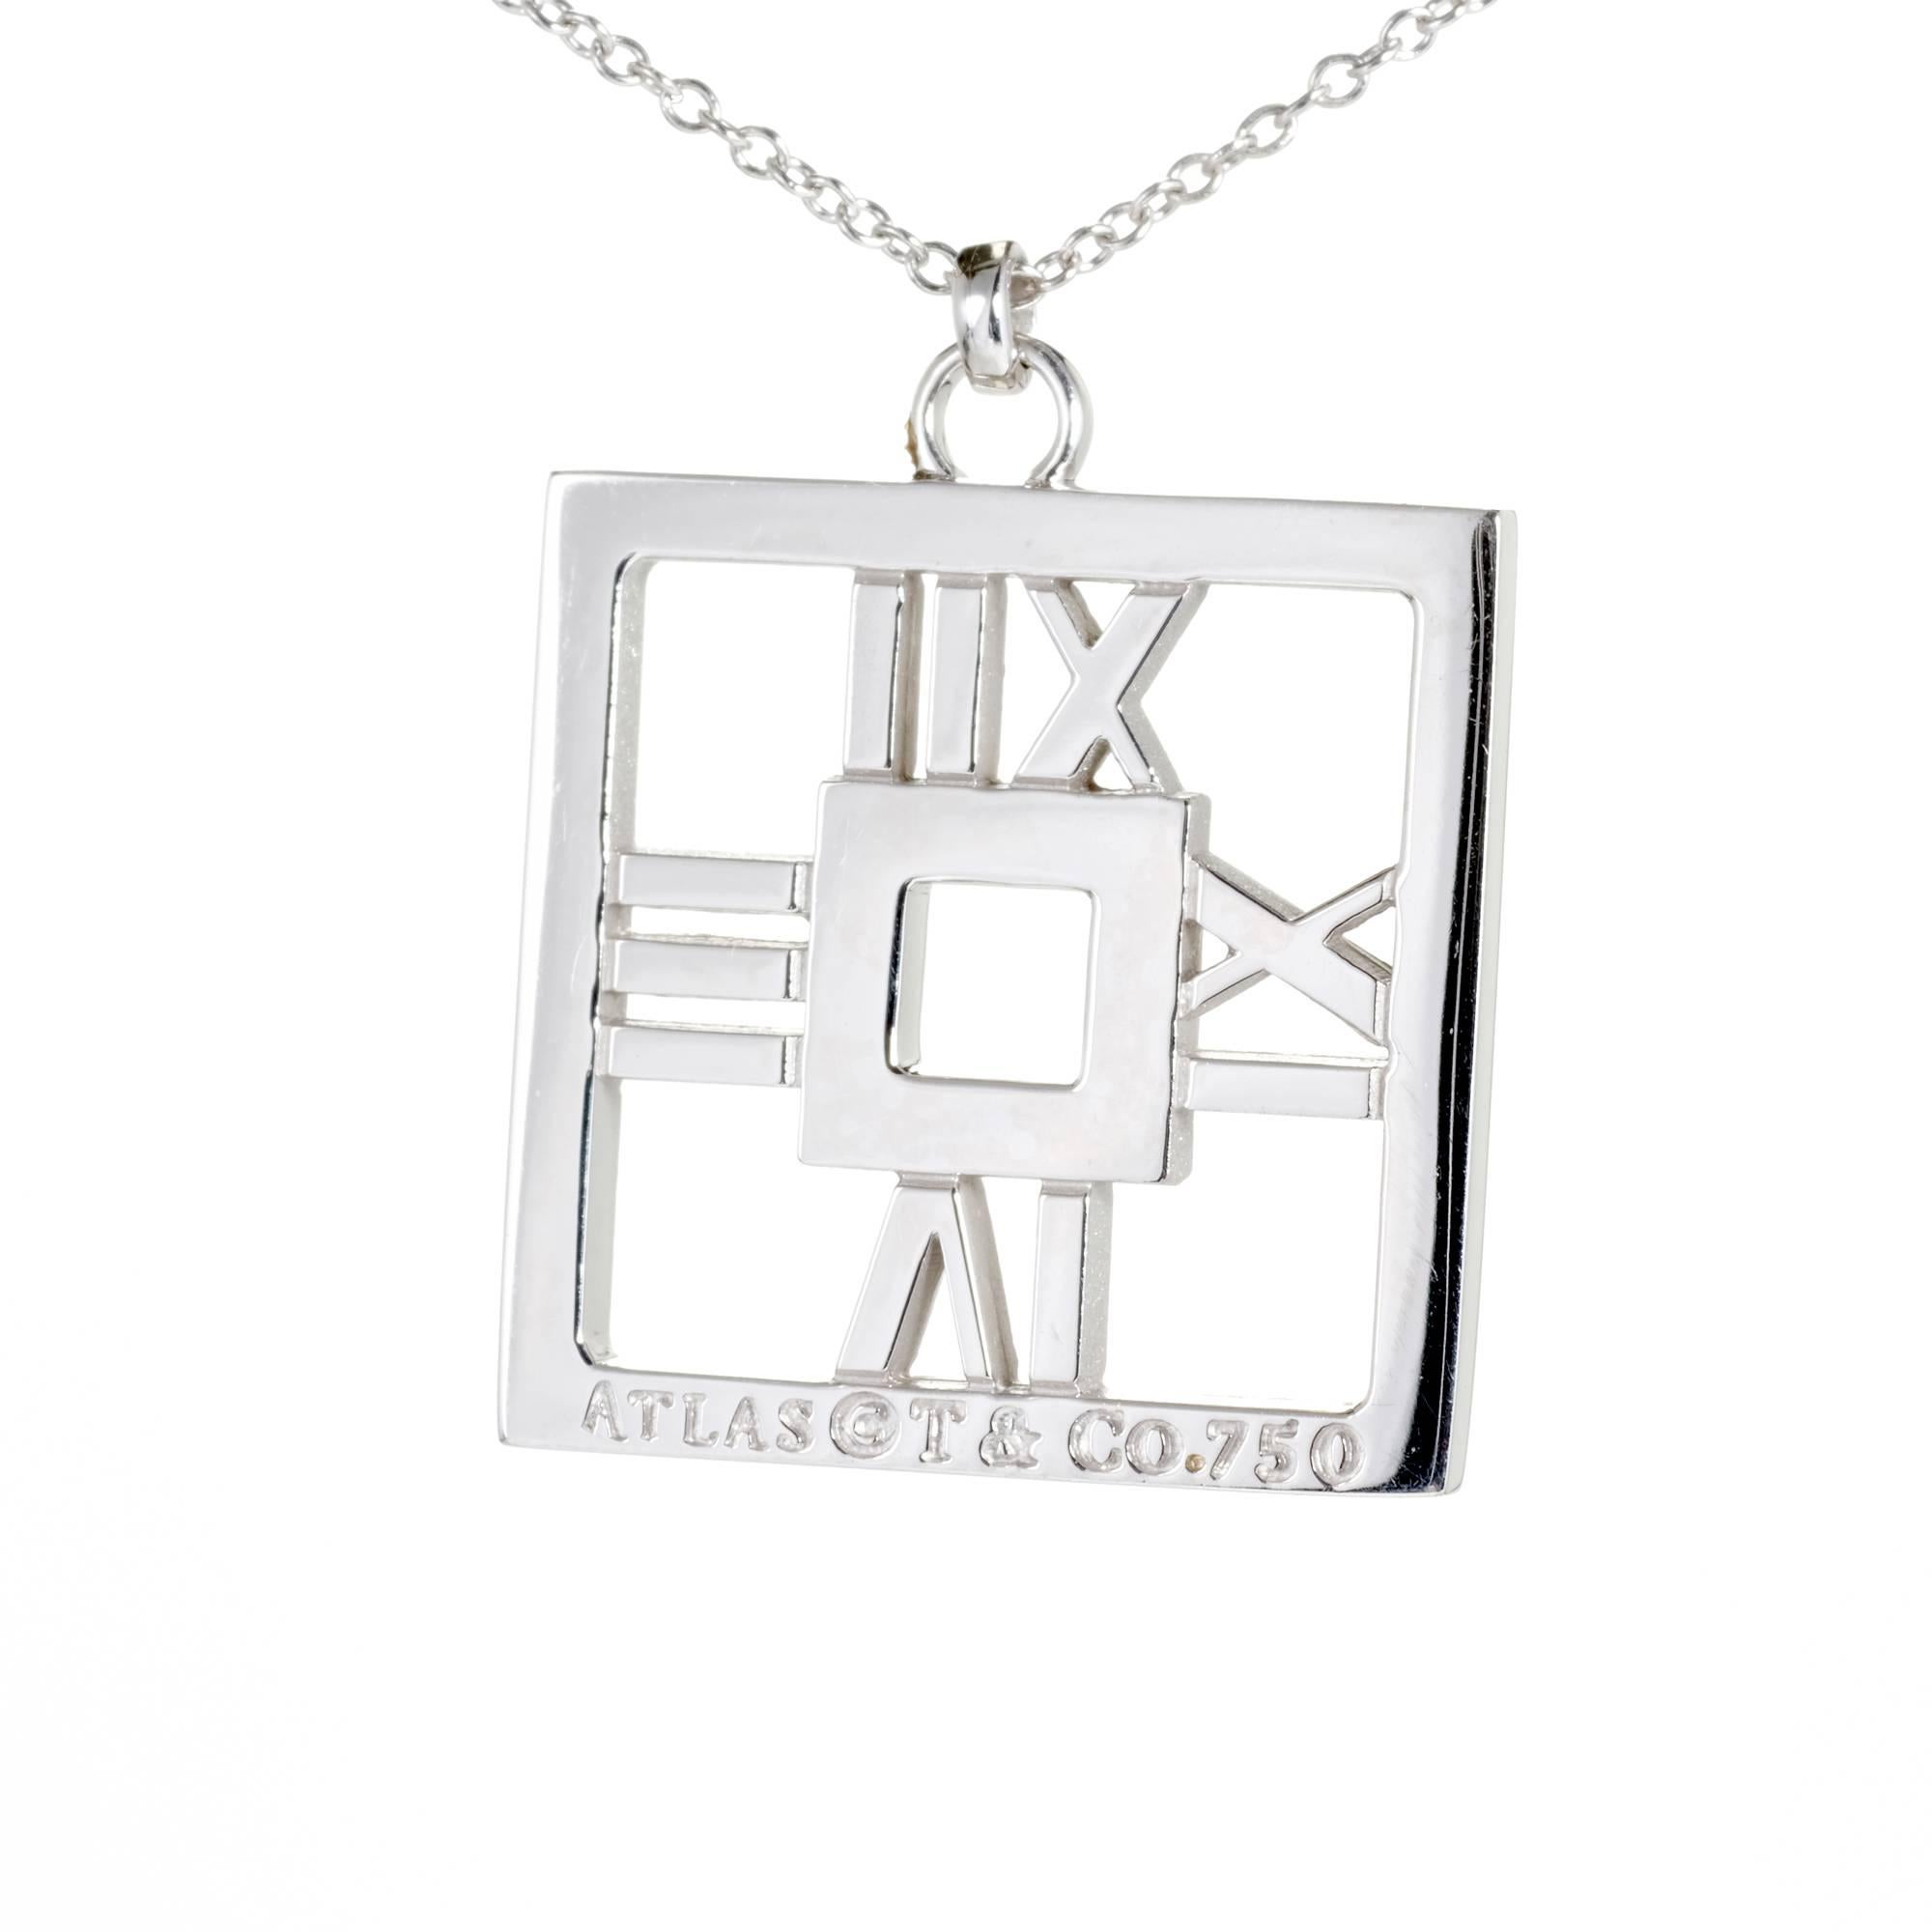 Tiffany & Co. diamond 18k white gold Atlas square numerical pendant necklace

16 round brilliant cut diamonds, approx. total weight .22cts, F-G, VS
18k white gold
Stamped: 750
Hallmark: Atlas Tiffany & Co
16 inch Tiffany chain
Width: 20.14mm
Depth: